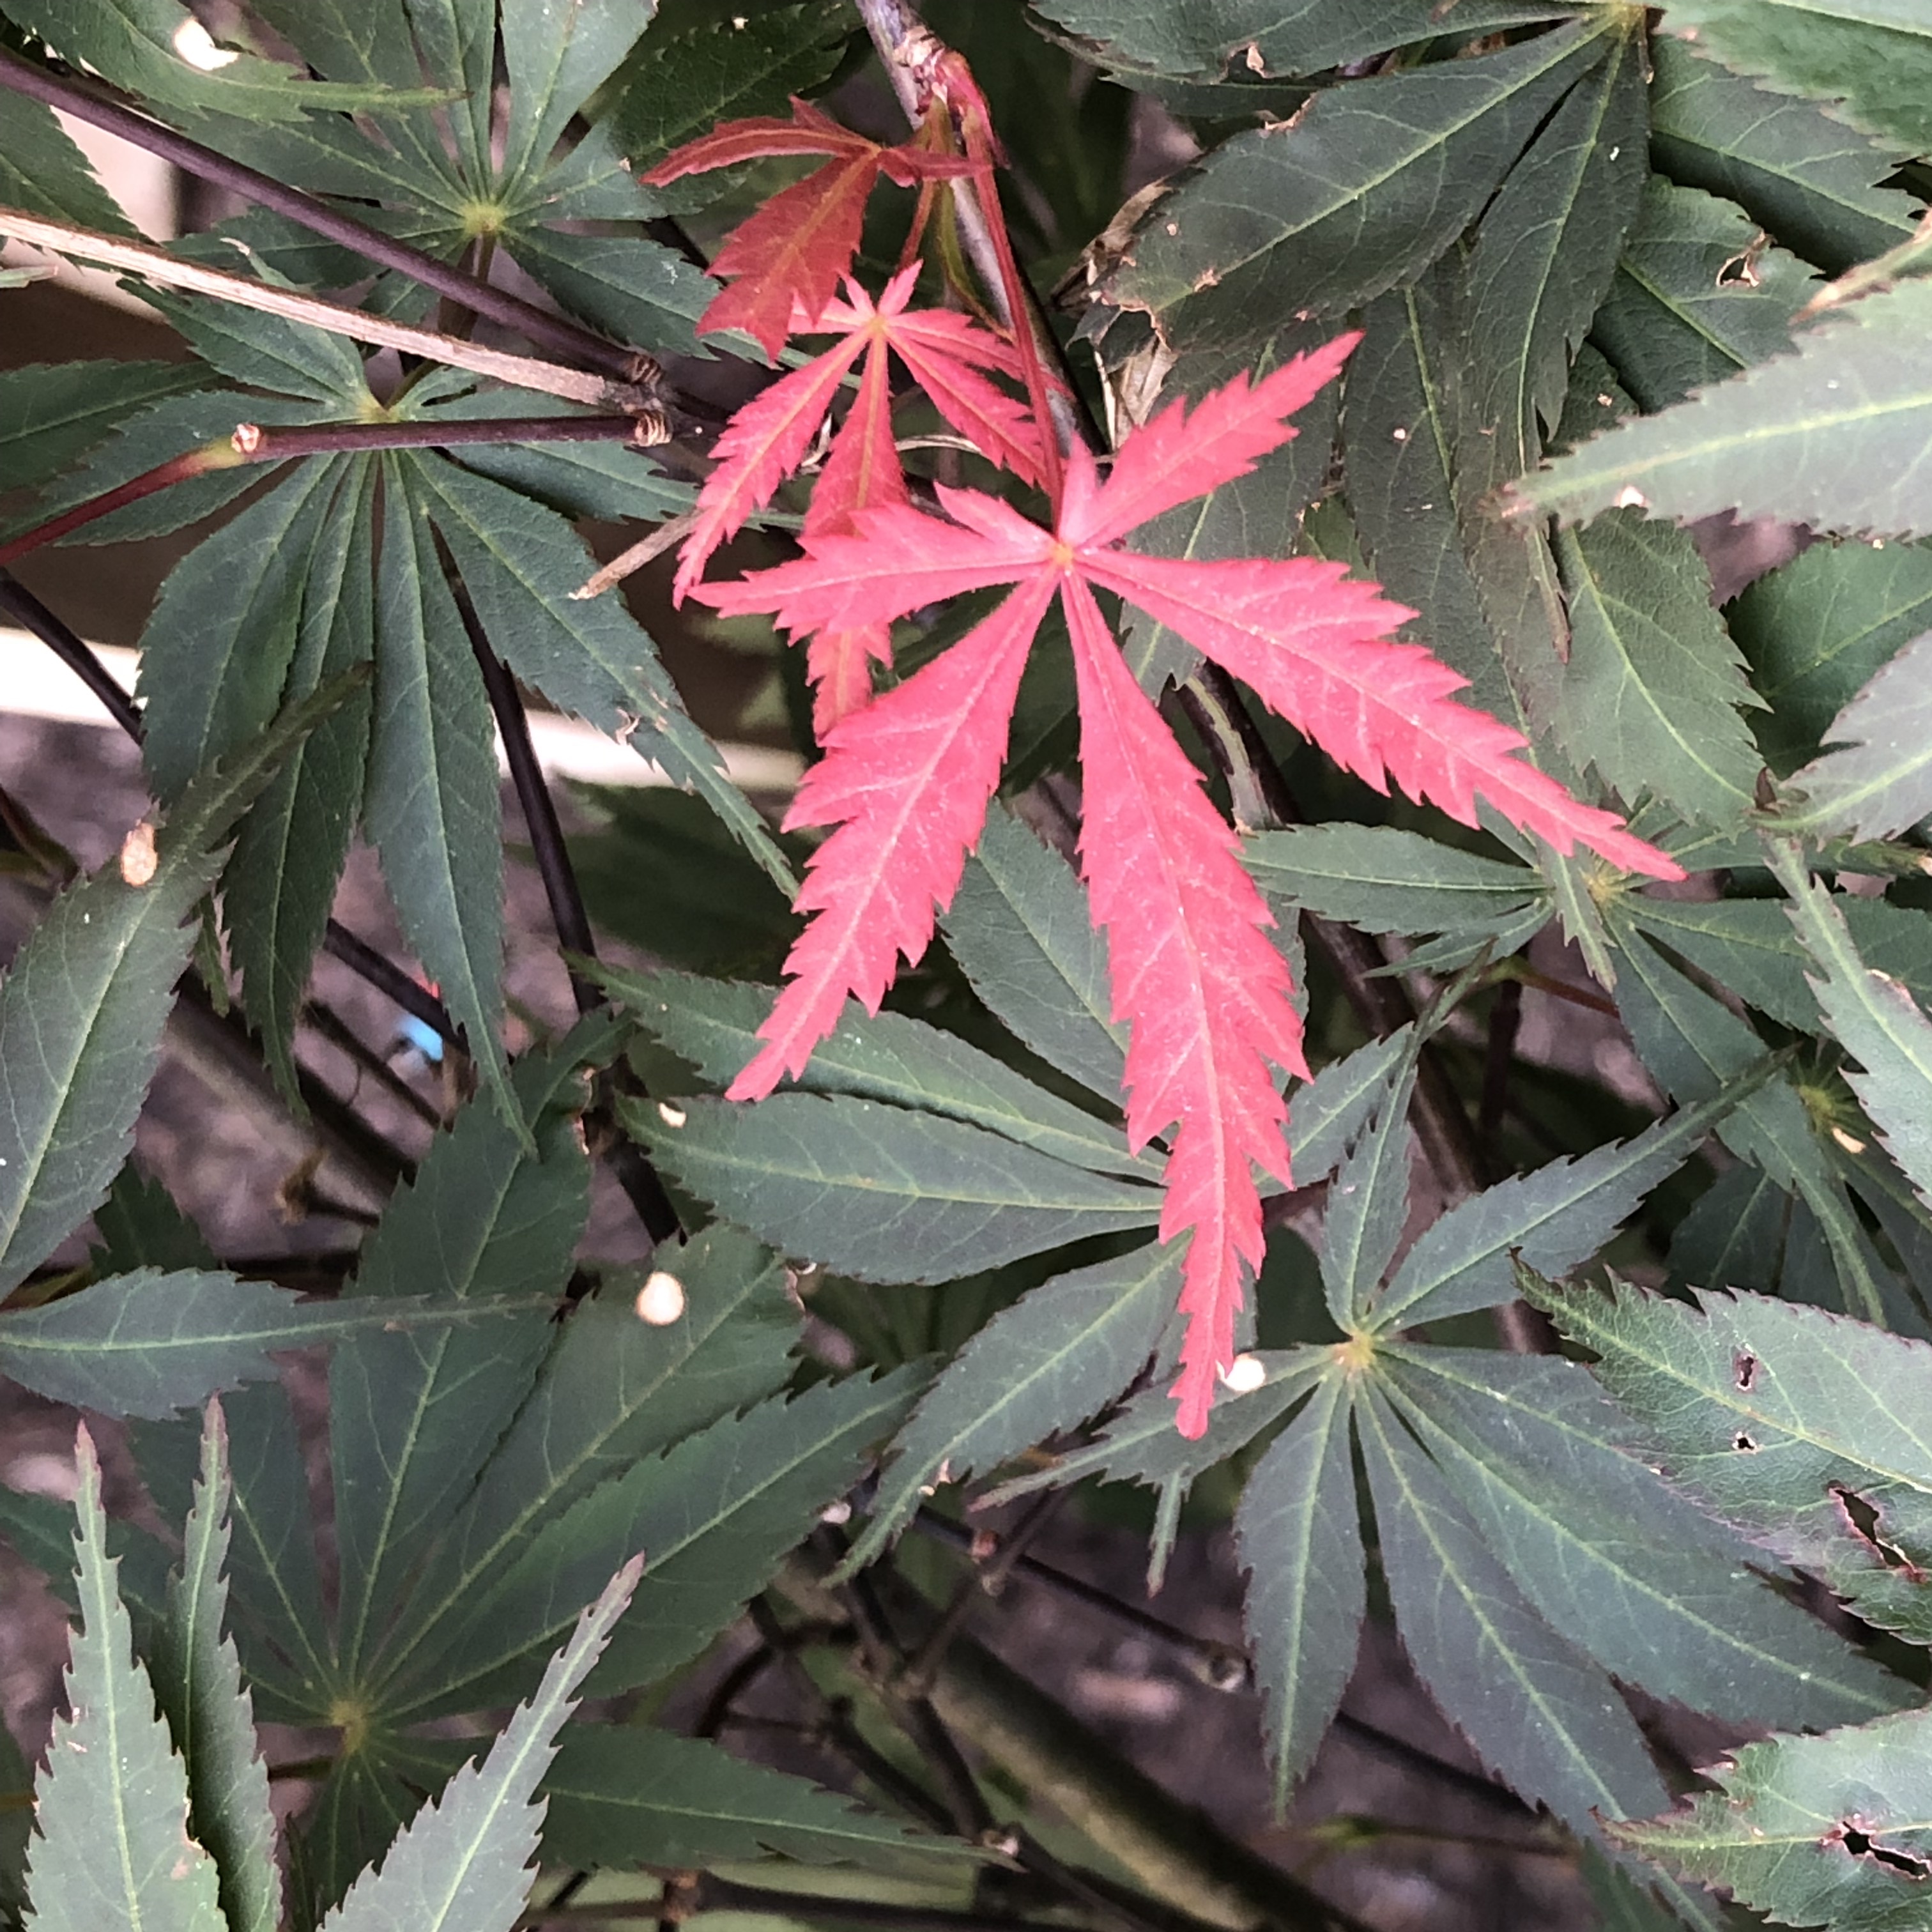 Various colors and shapes of maple leaves